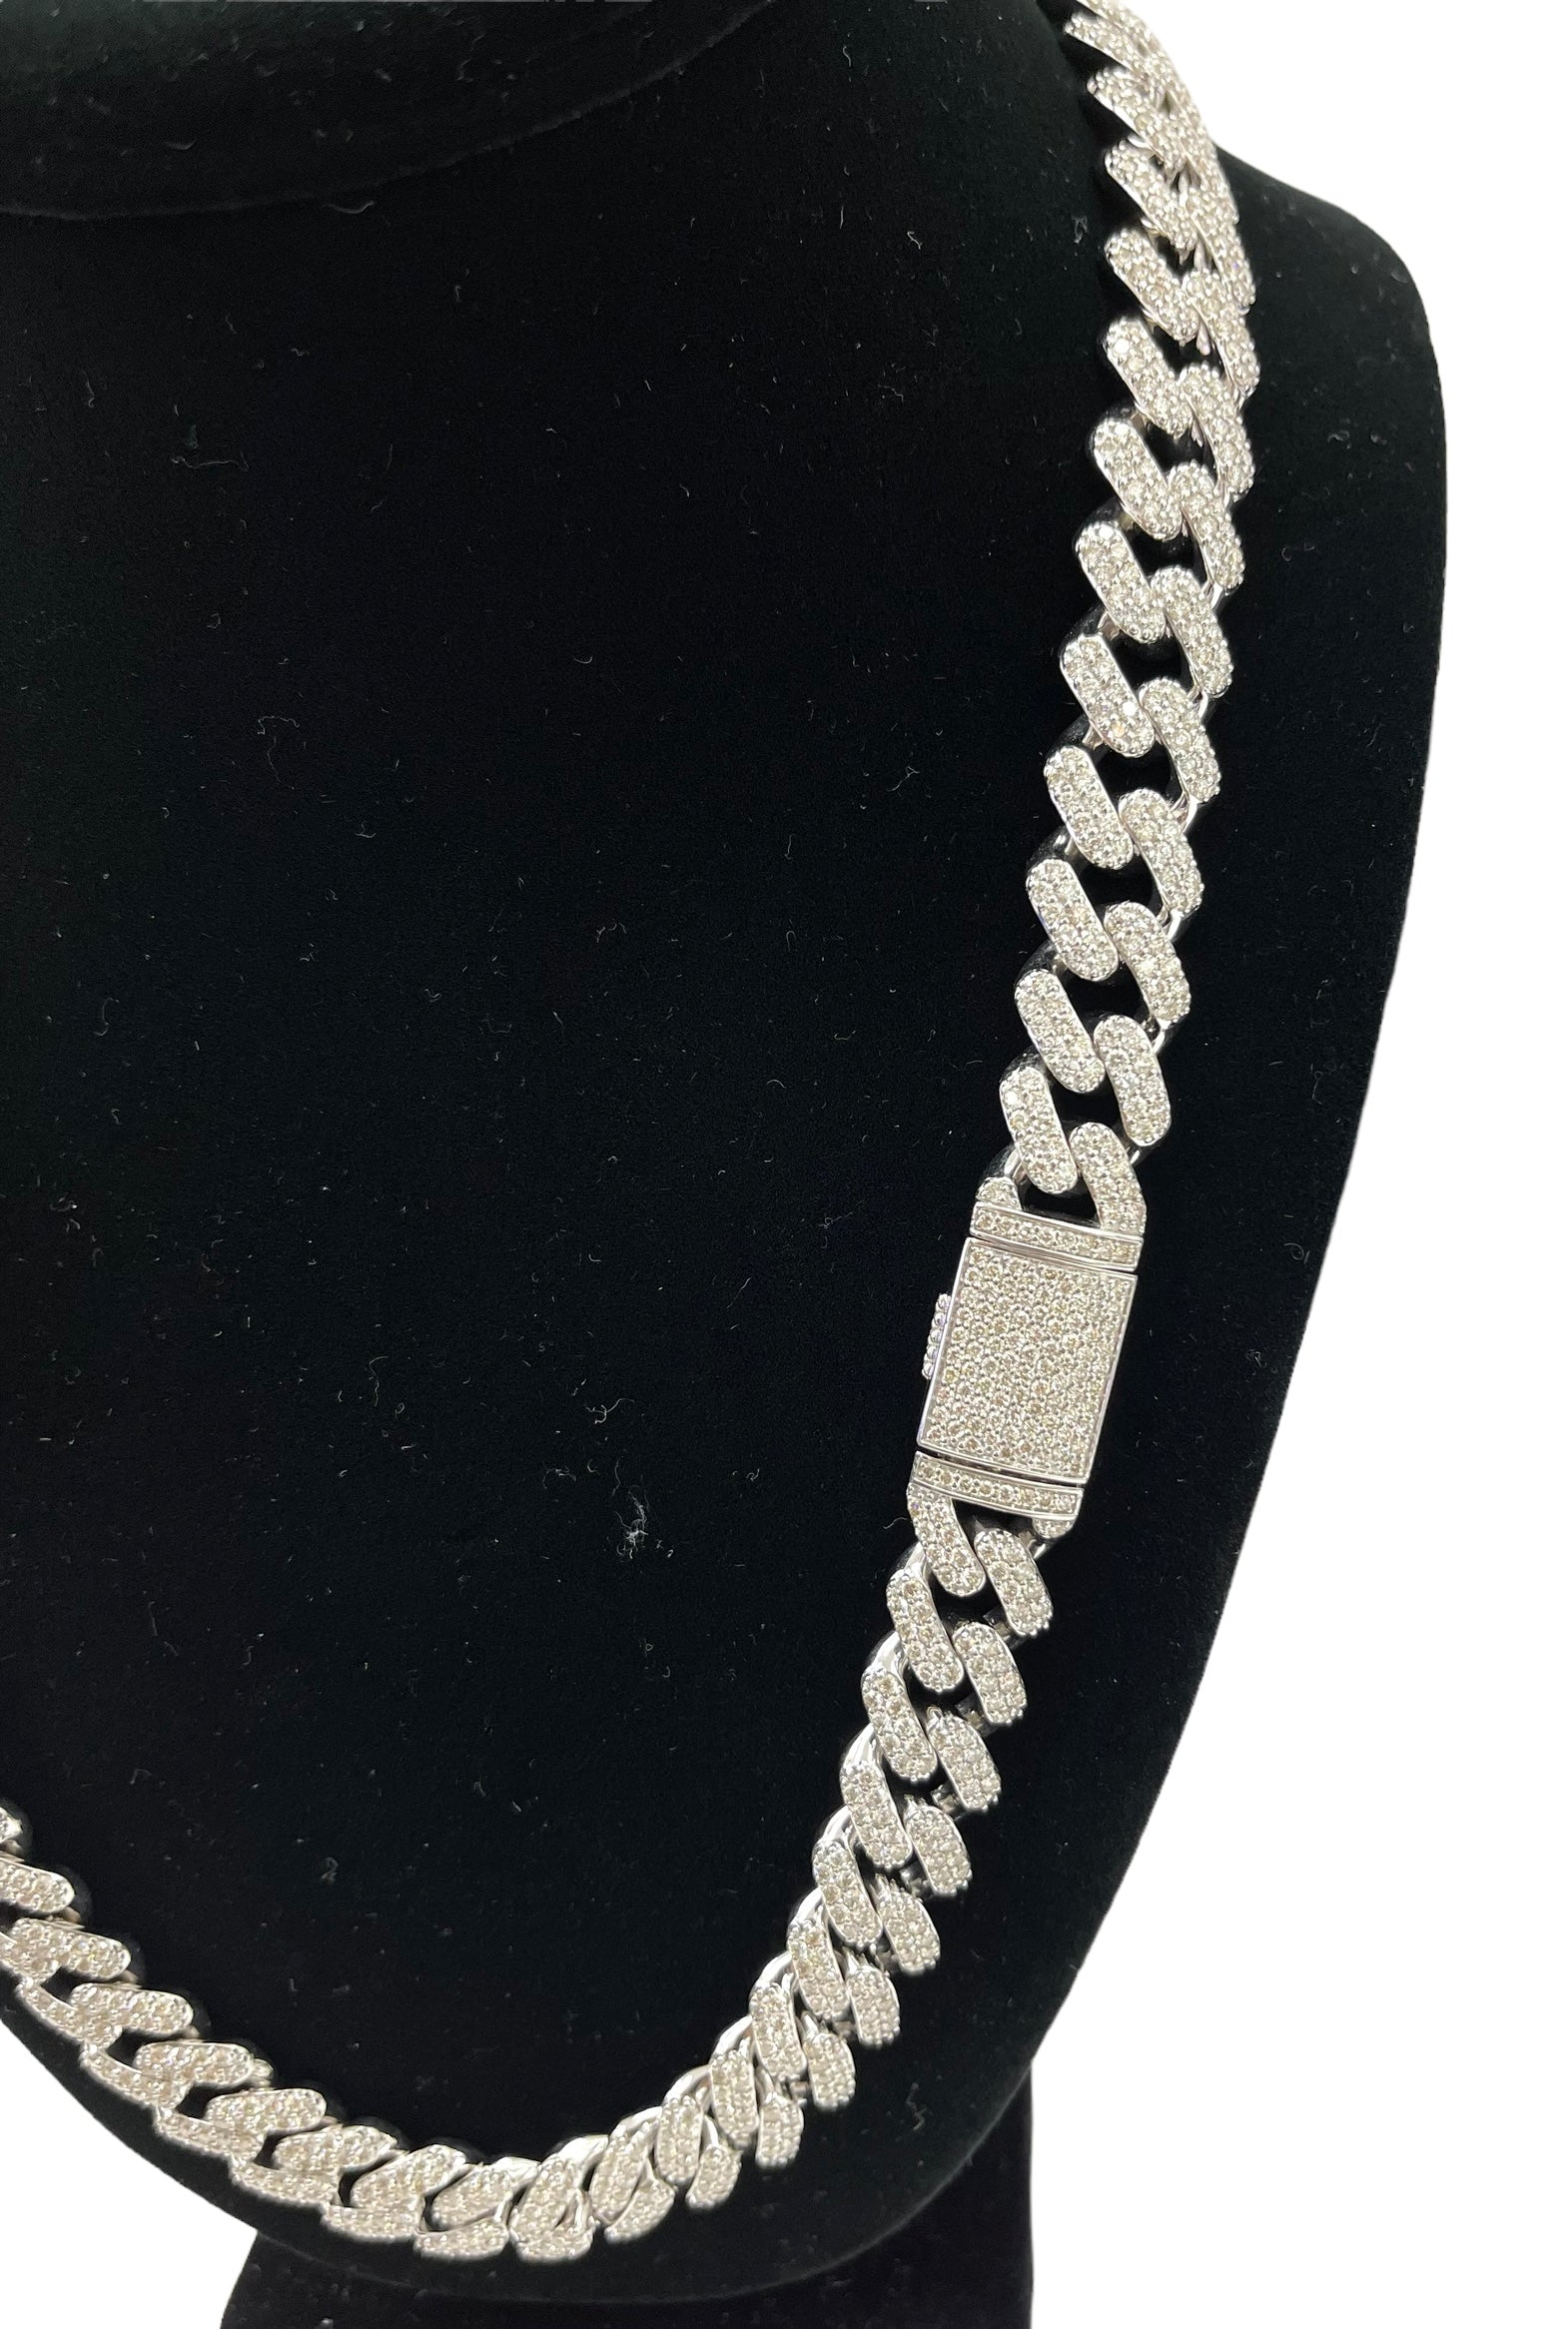 Cuban Link Diamond Necklace Chain 11mm White Gold 14kt